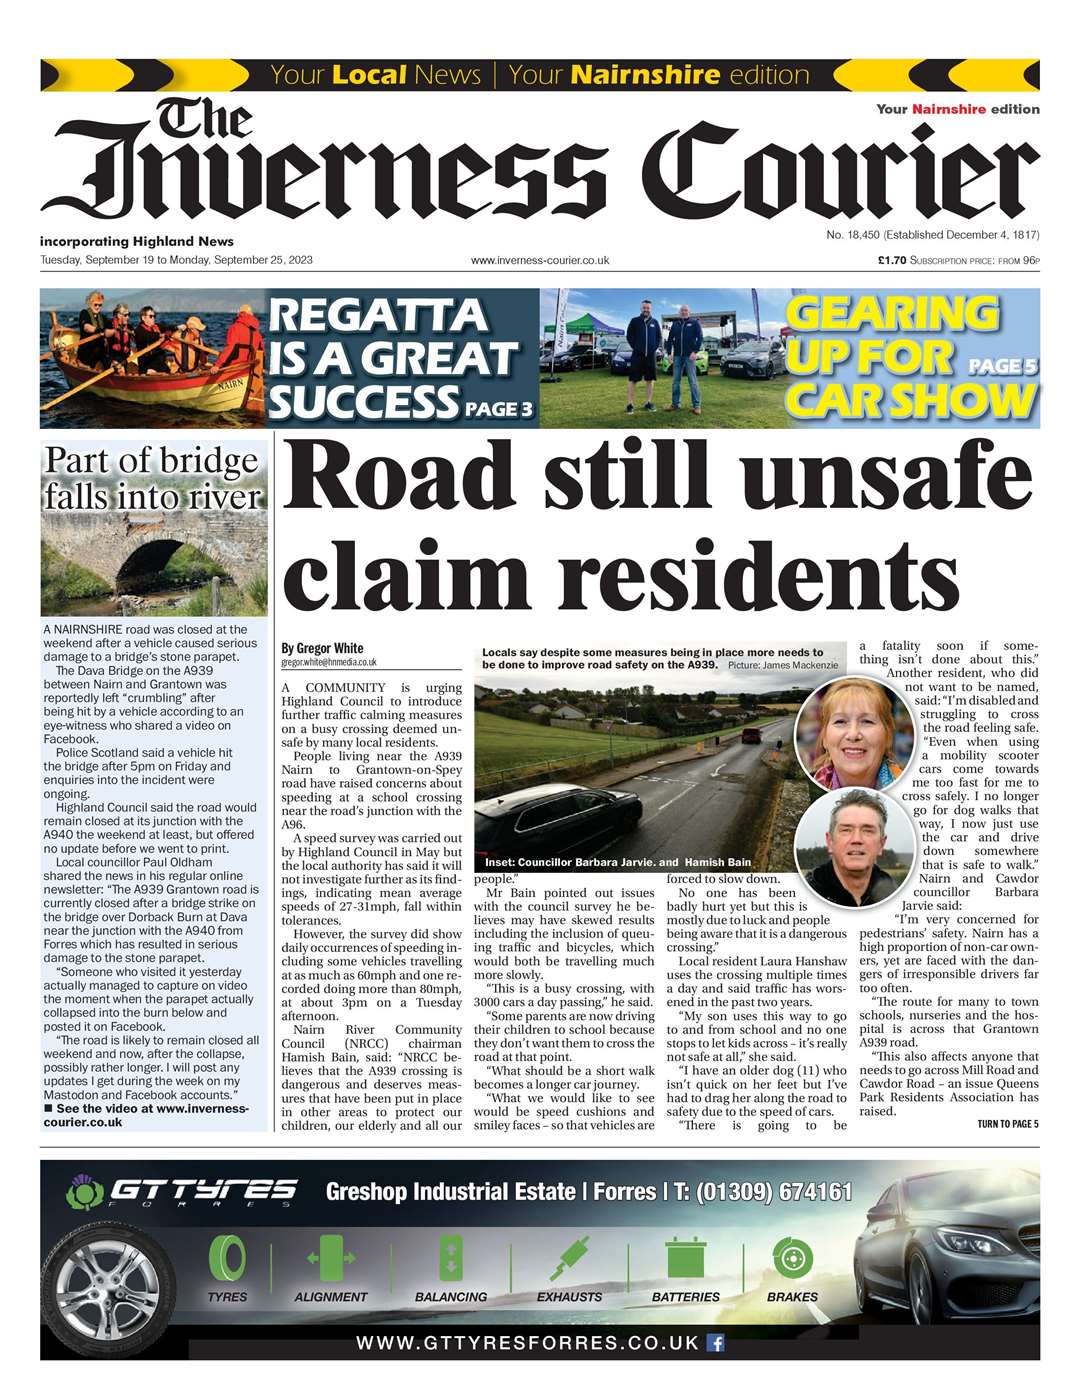 The Inverness Courier (Nairnshire edition), September 19, front page.